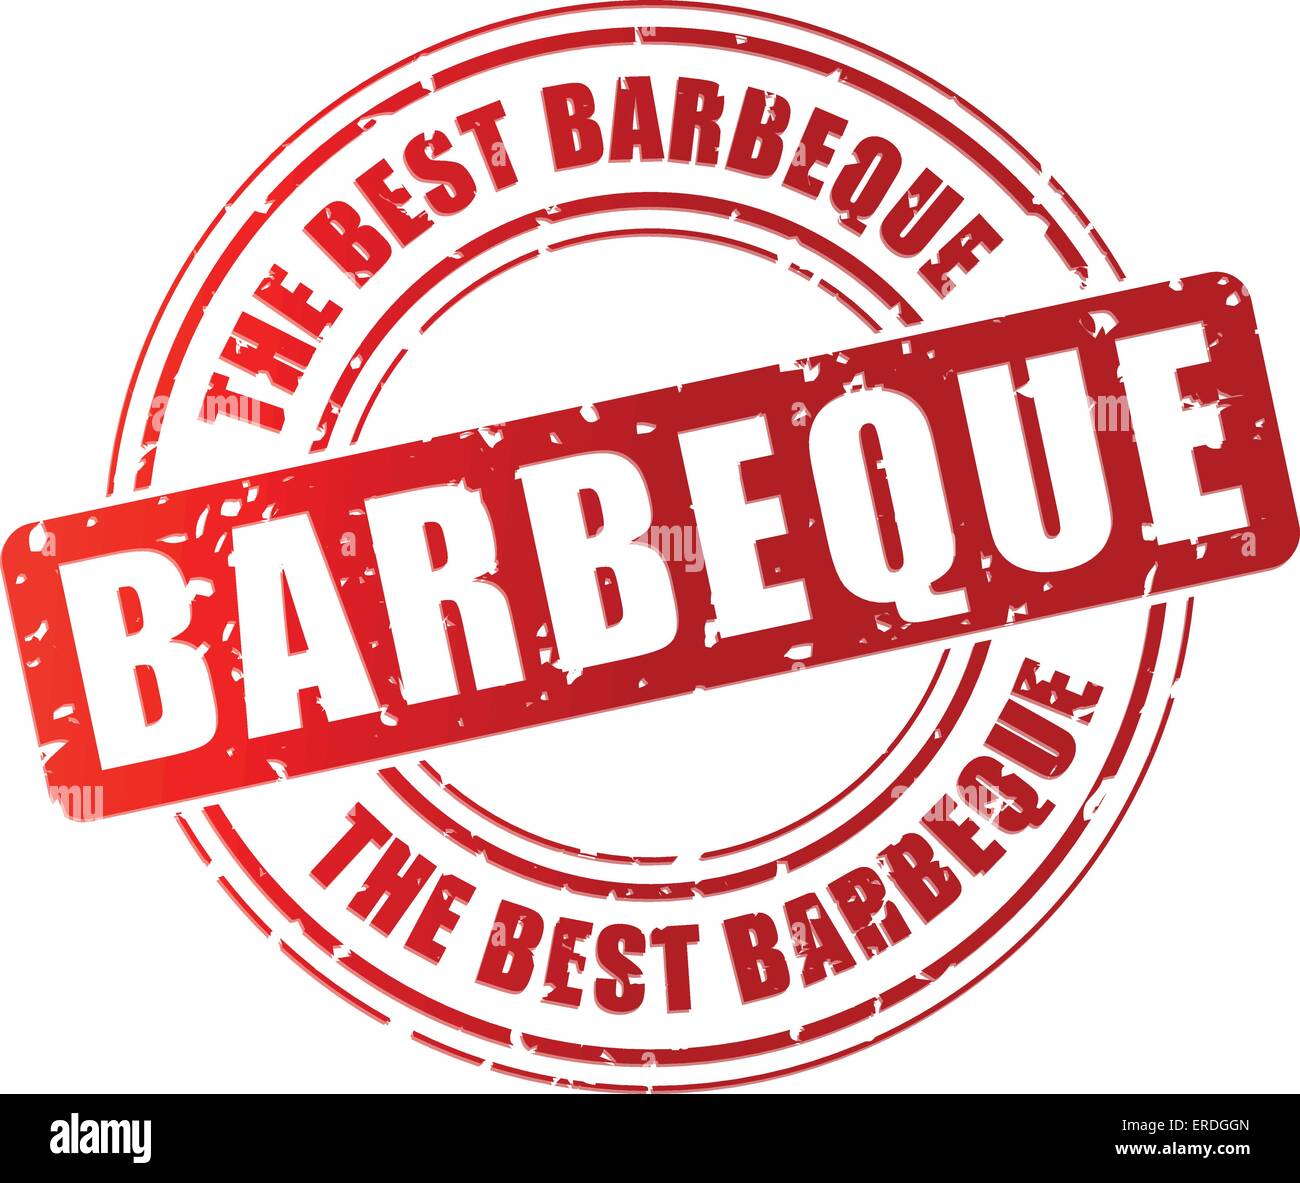 Vector illustration of red barbeque stamp on white background Stock Vector